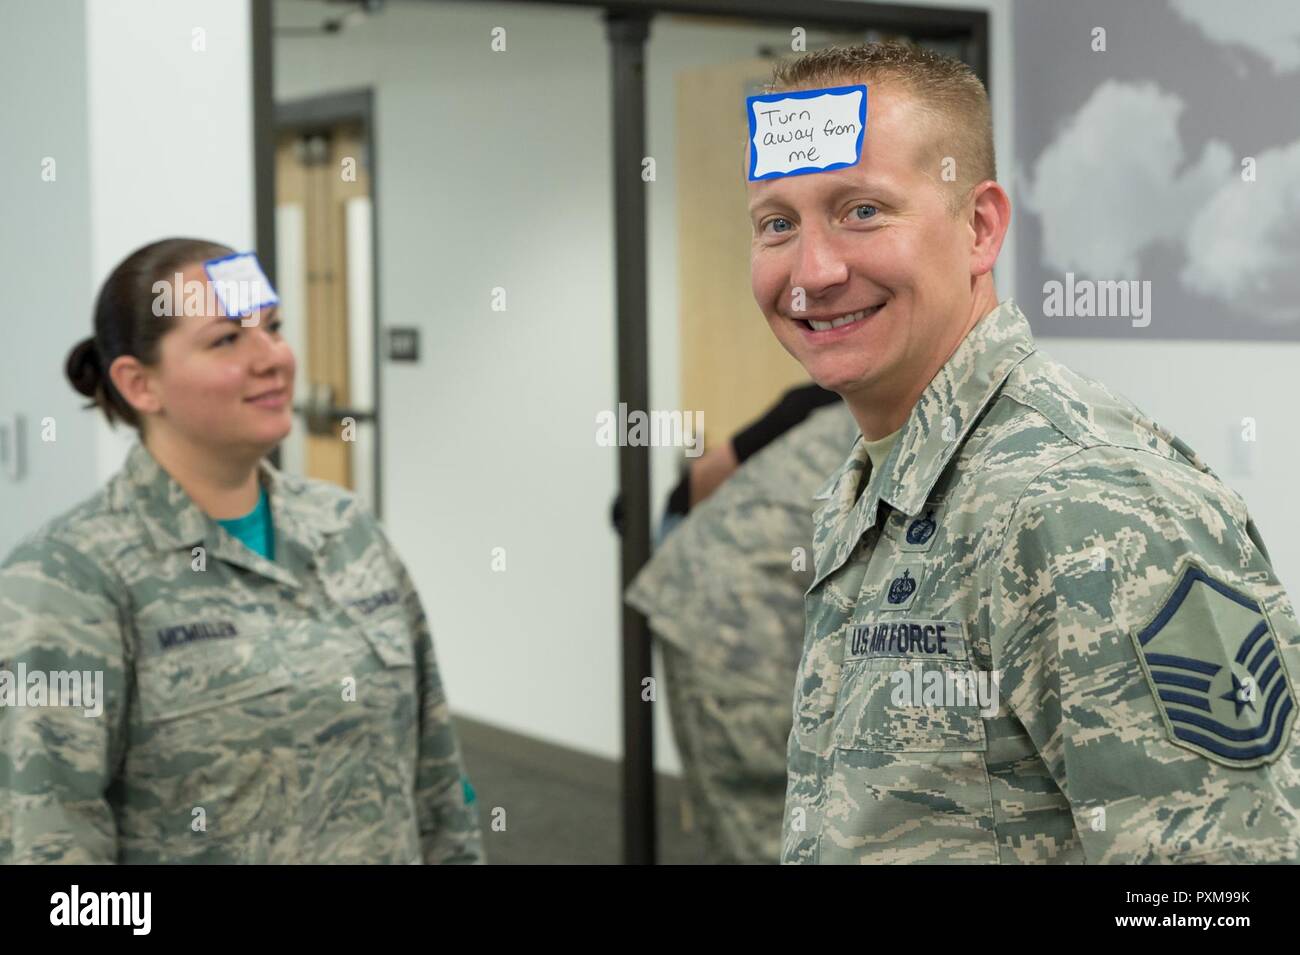 Vijftig Onaangeroerd Konijn U.S. Air Force Master Sgt. John Rode wears a sign on his forhead during a  brown bag lunch presentation, June 10, 2016 in Cheyenne, Wyoming. Rode and  other Airmen with the 153rd